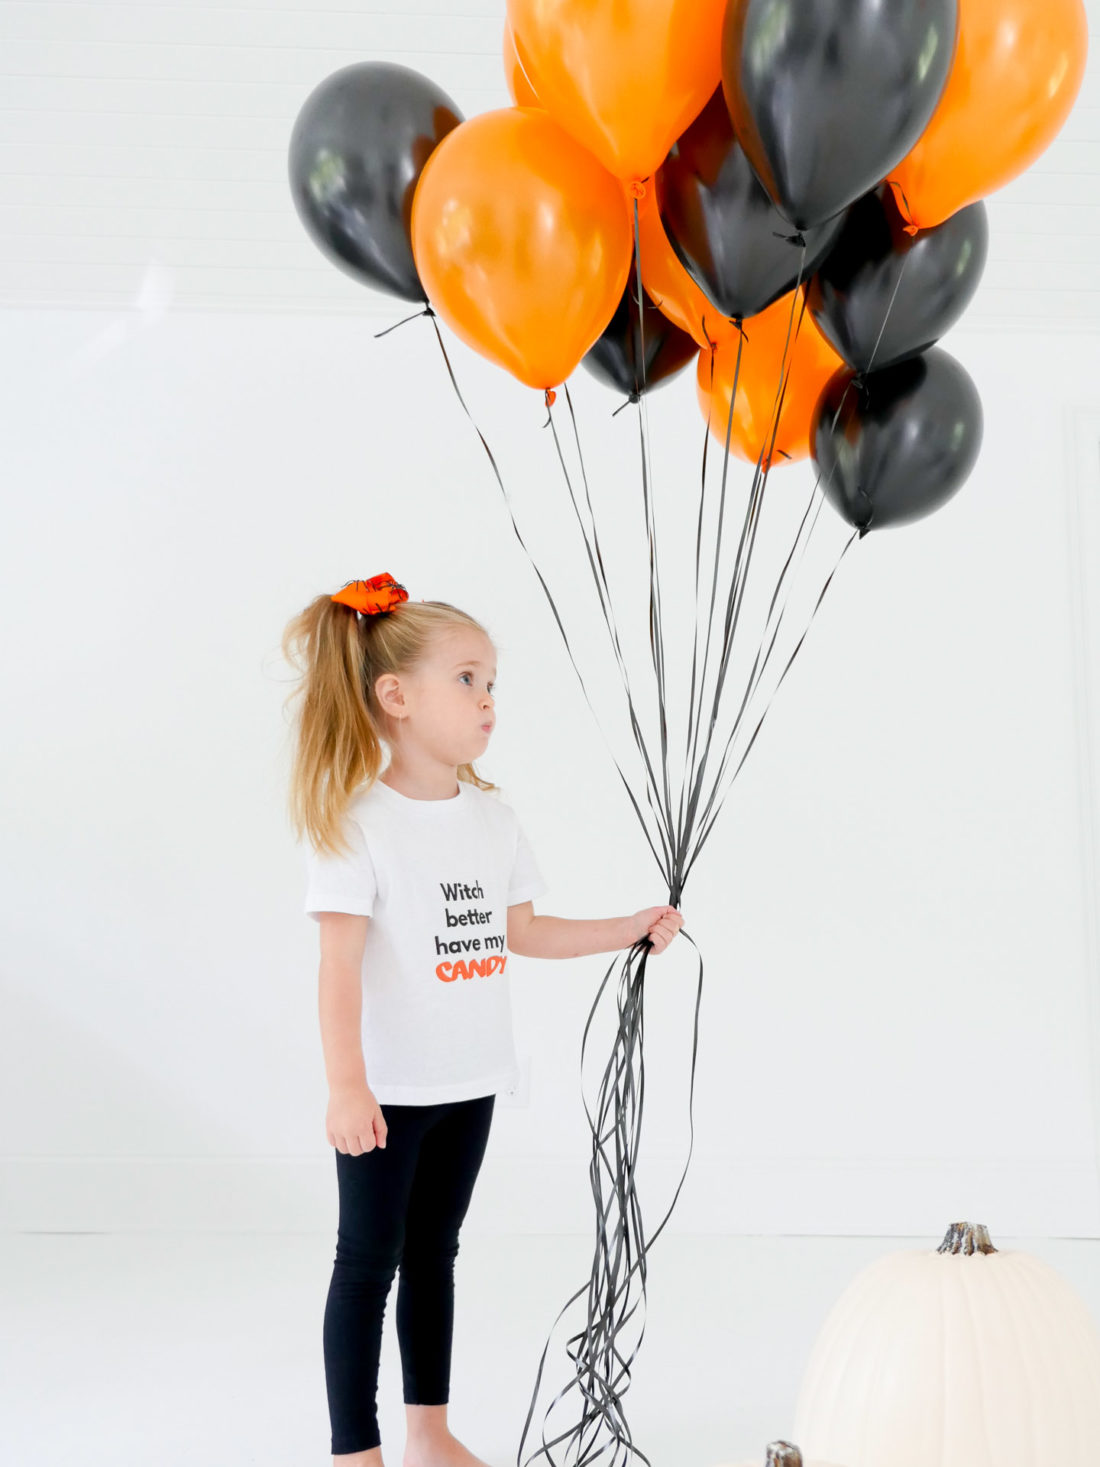 Marlowe Martino wears a festive Halloween tee shirt designed using The Happily App and holds a big bundle of orange and black balloons